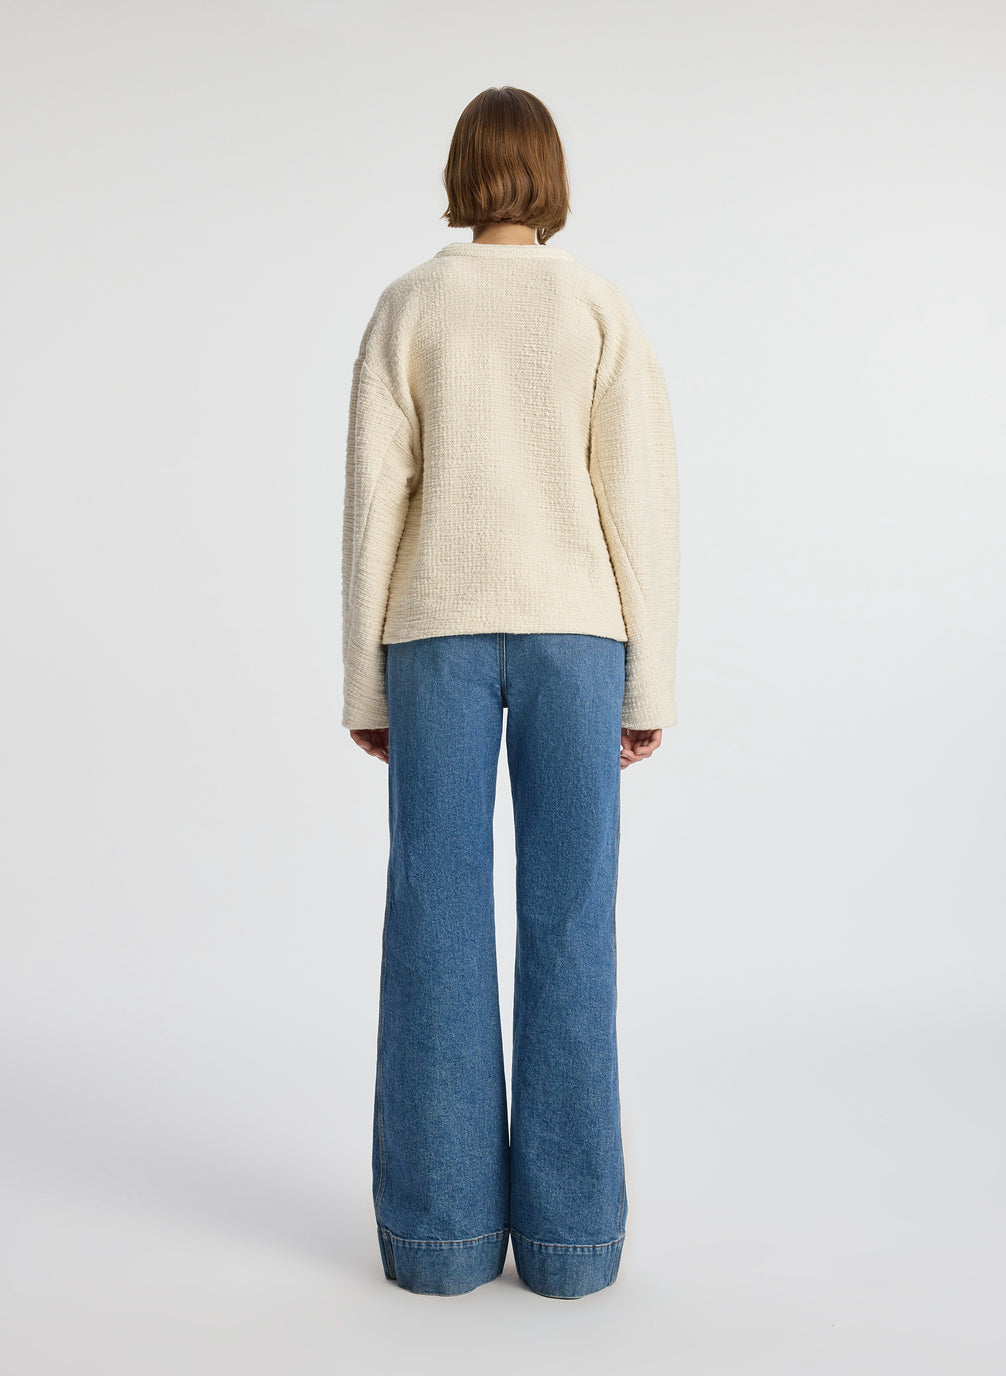 back view of woman wearing cream boucle jacket, cream tank top and medium blue denim jeans